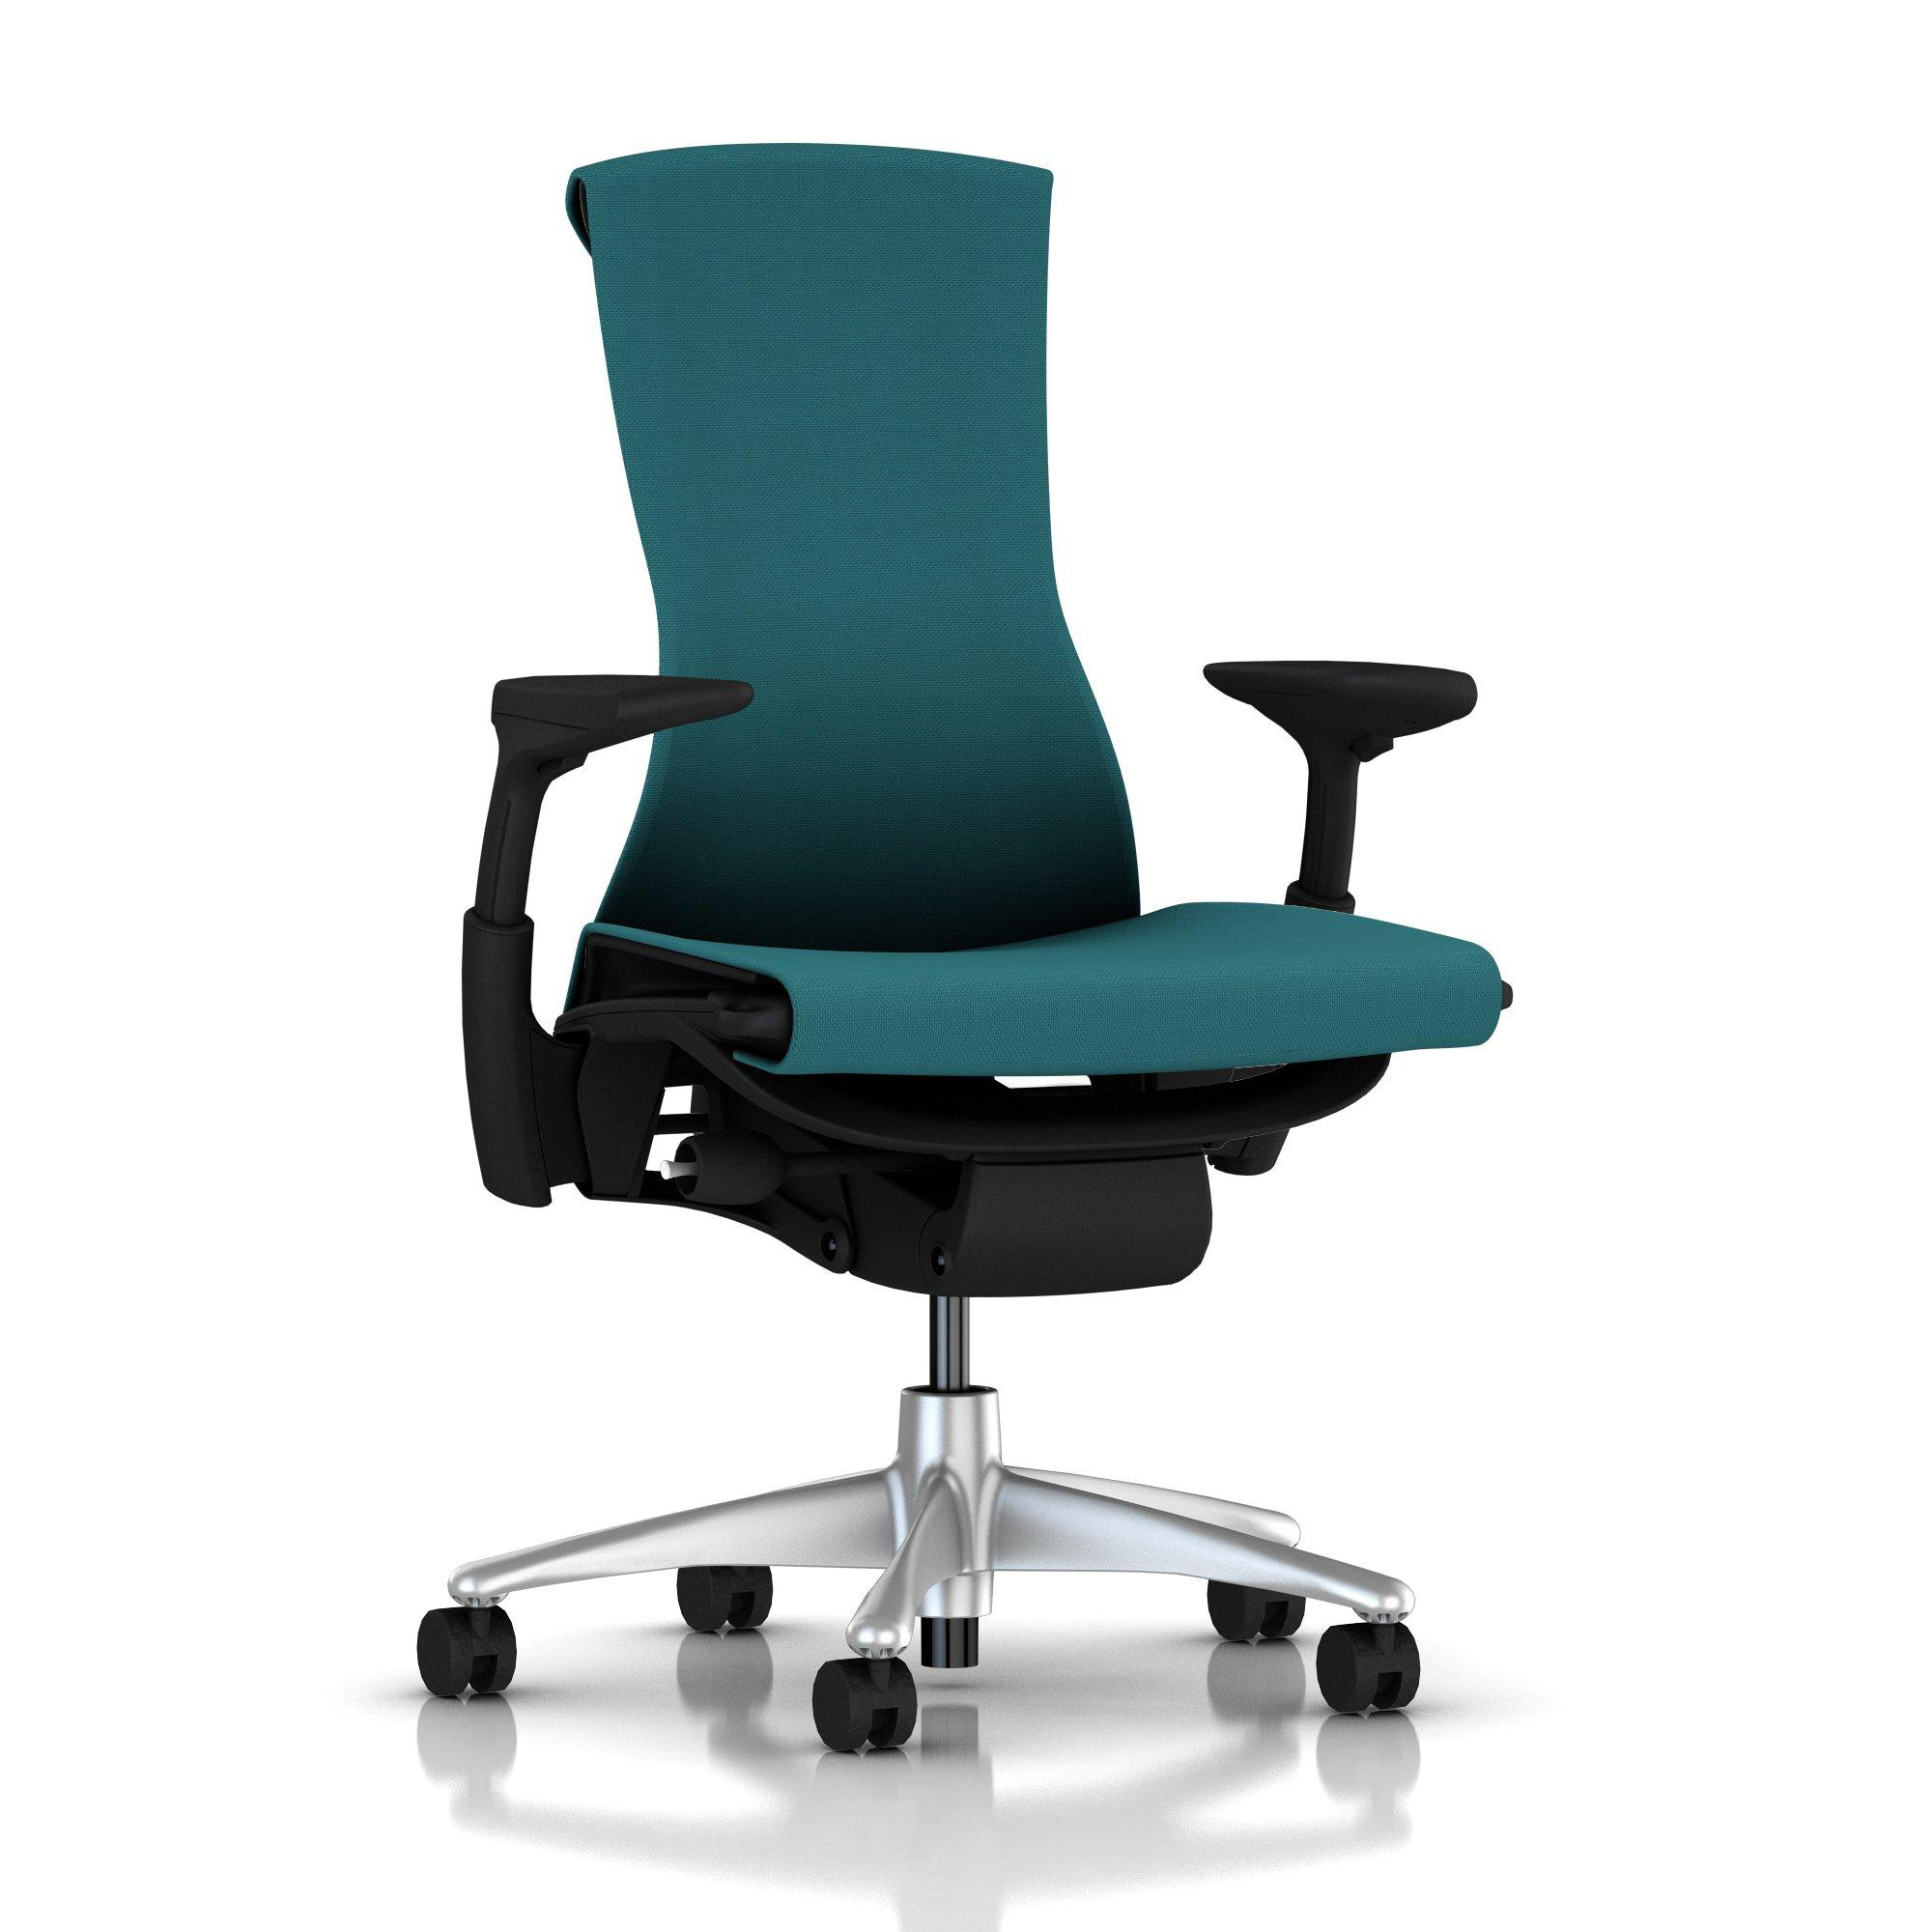 Embody Chair Peacock Rhythm with Graphite Frame Titanium Base by Herman Miller